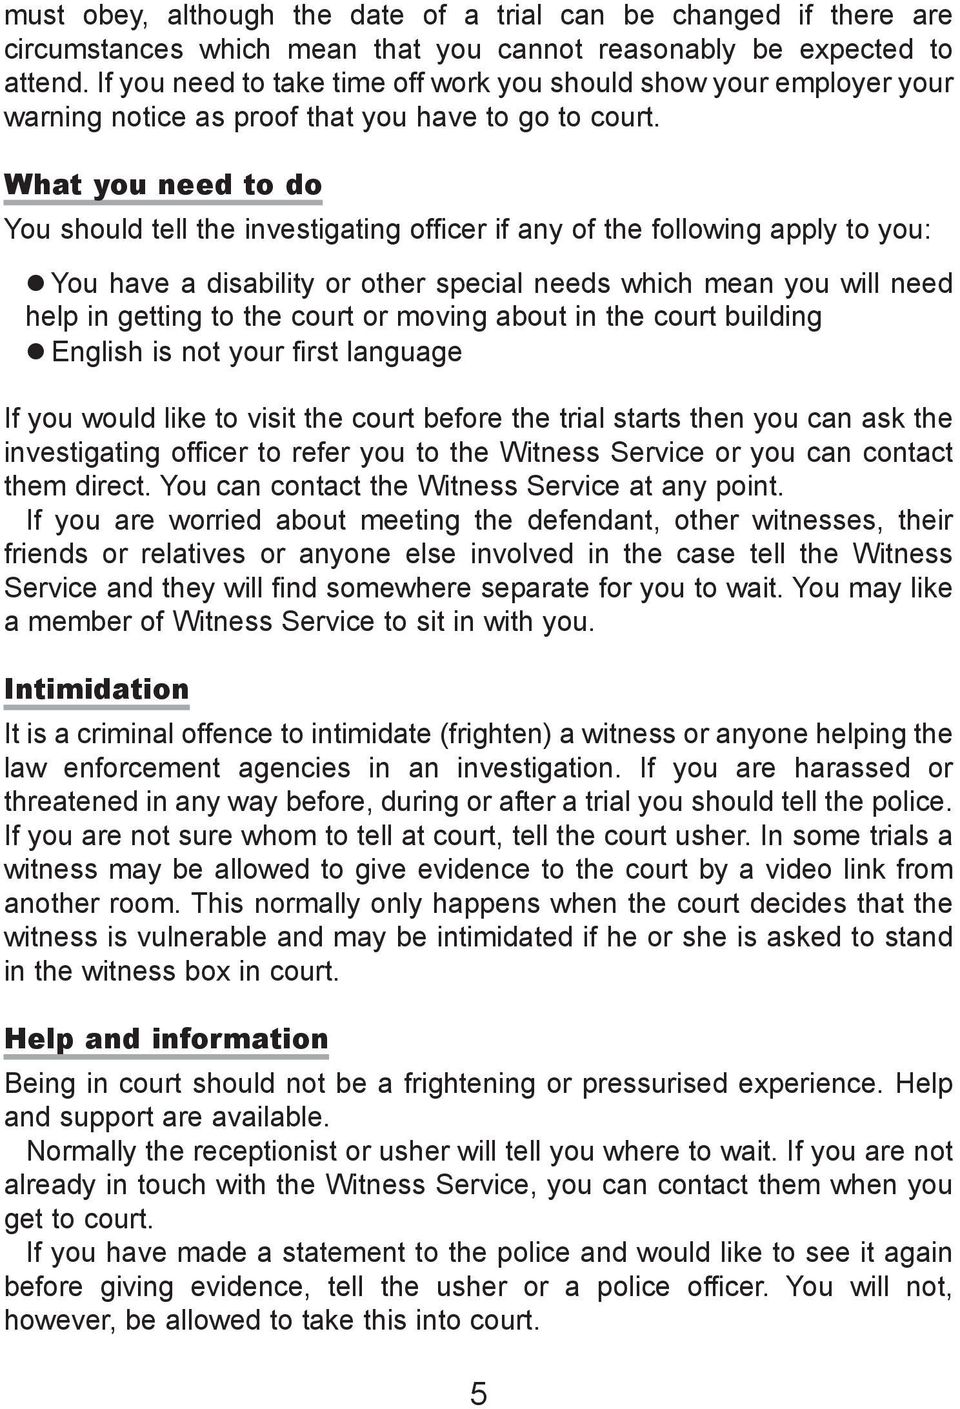 What you need to do You should tell the investigating officer if any of the following apply to you: You have a disability or other special needs which mean you will need help in getting to the court